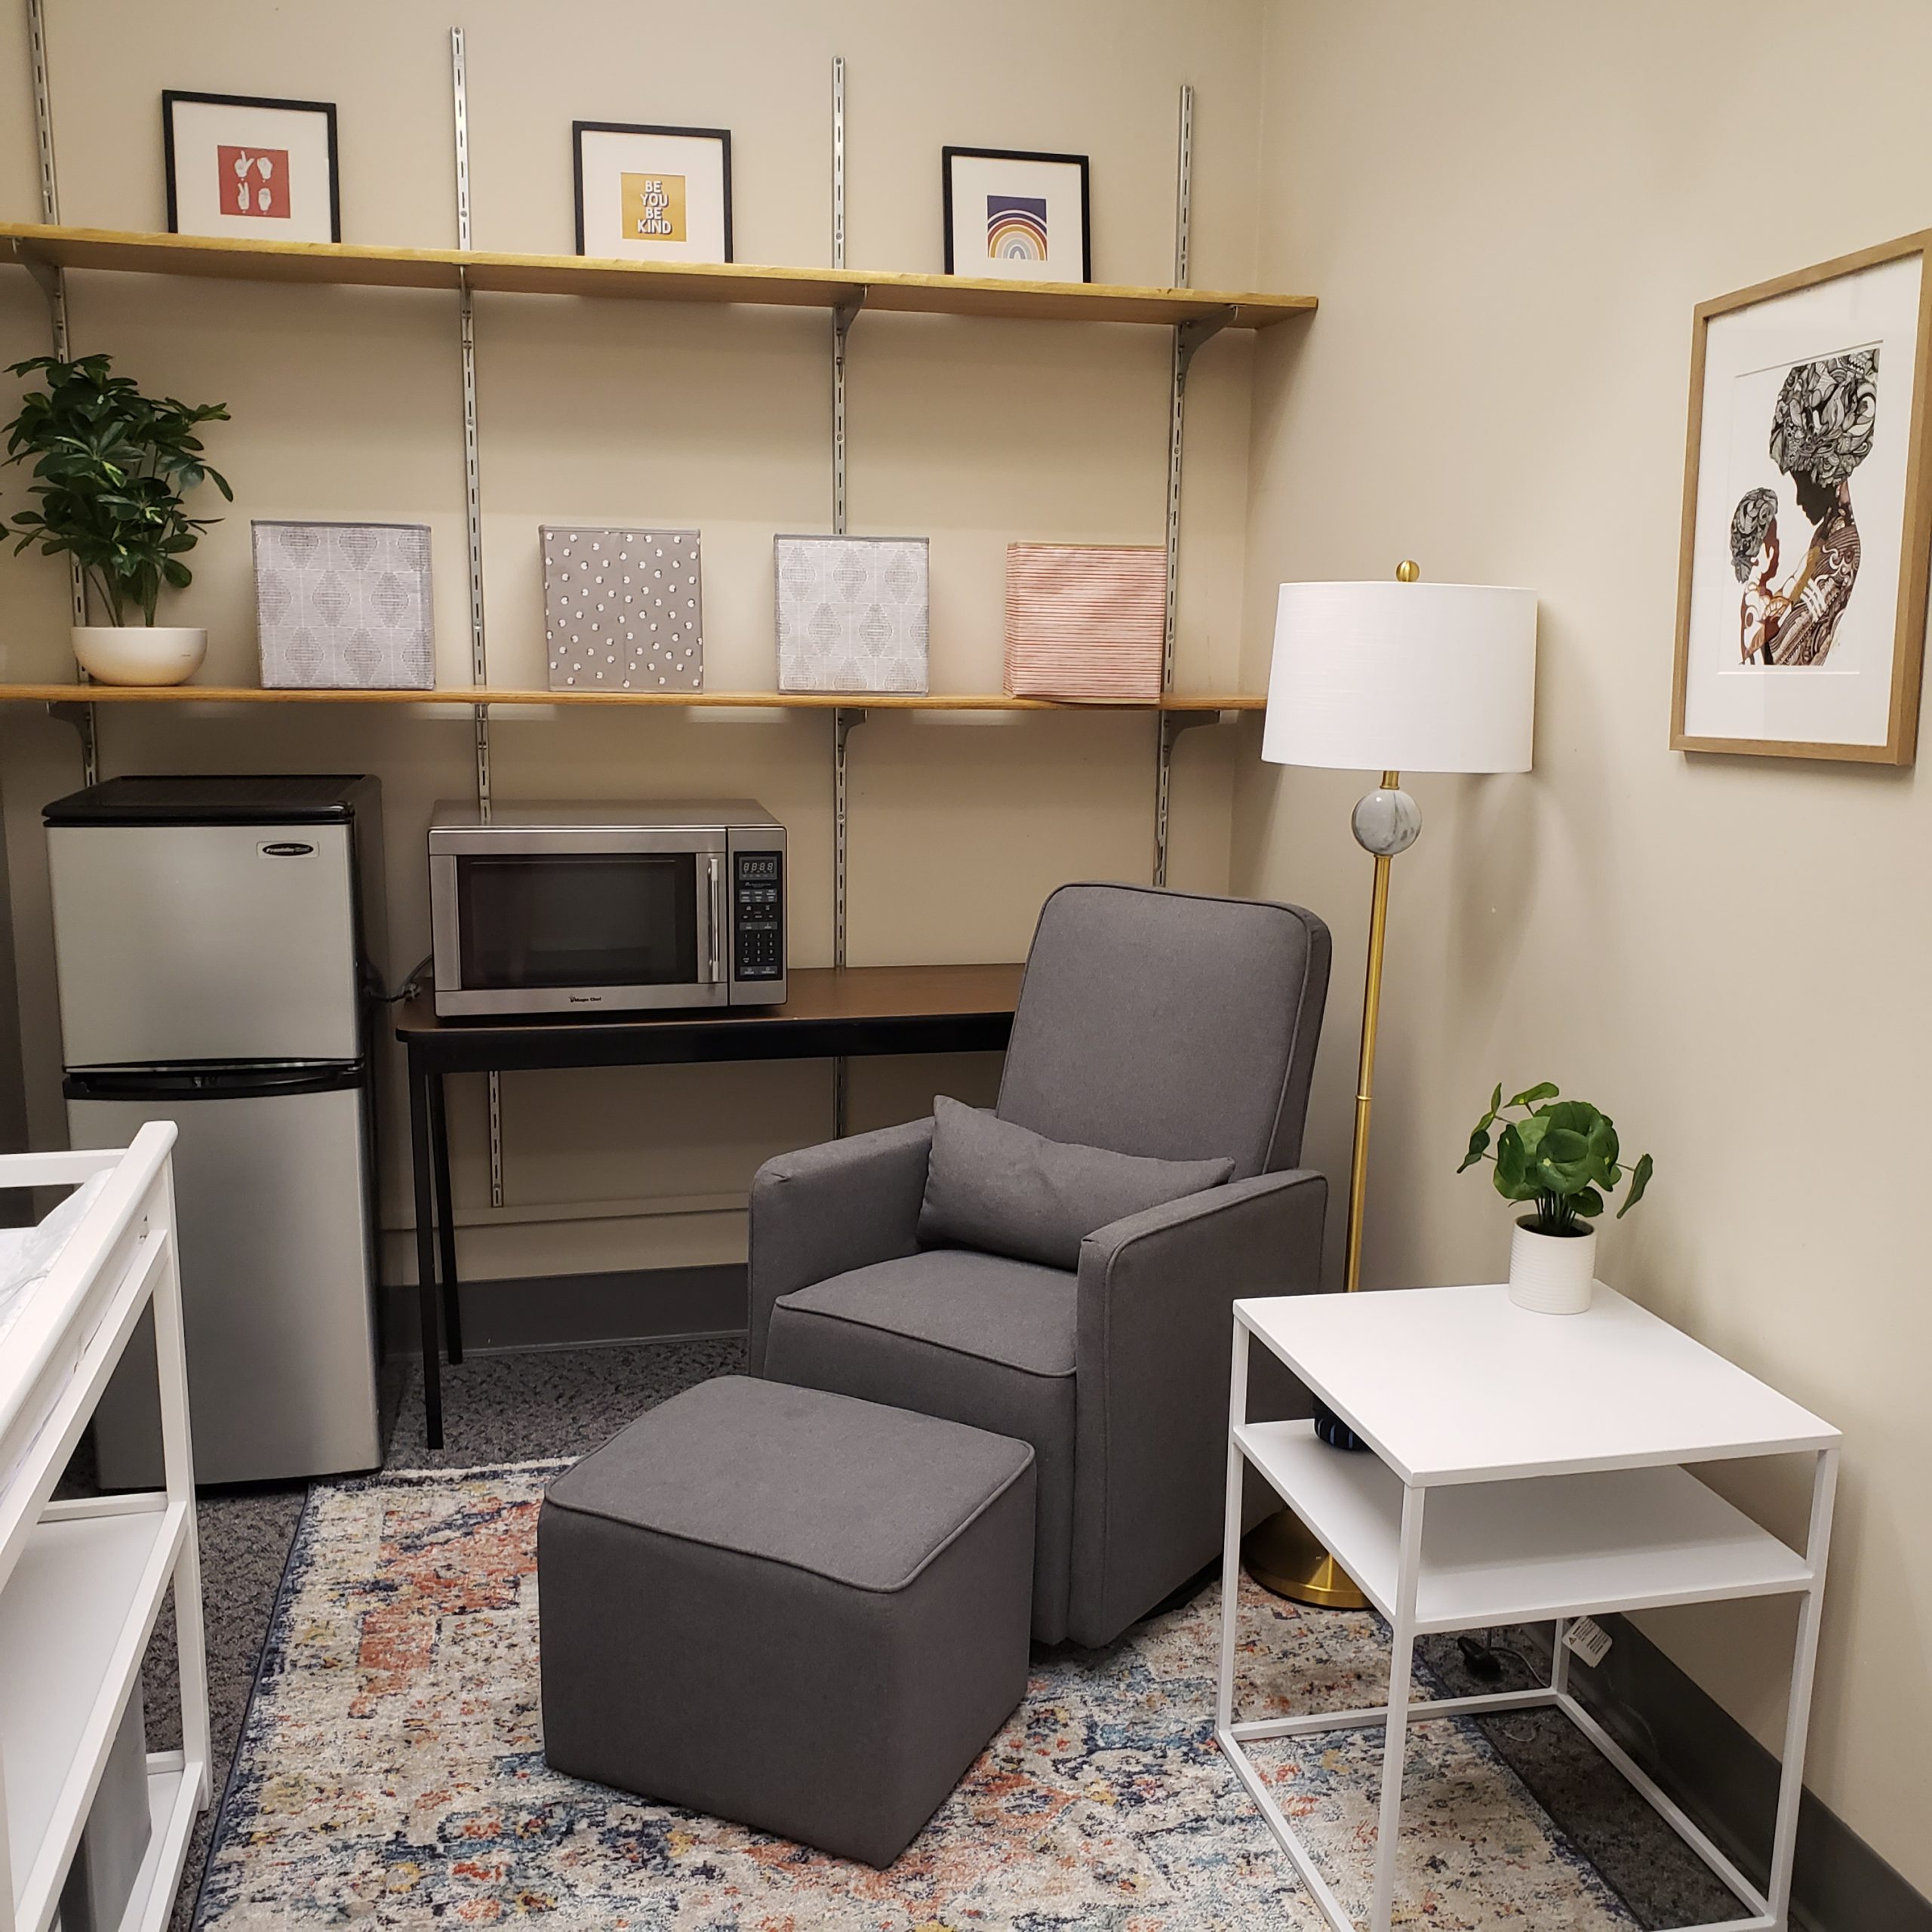 New lactation room in Peik Hall creates a space for student parents